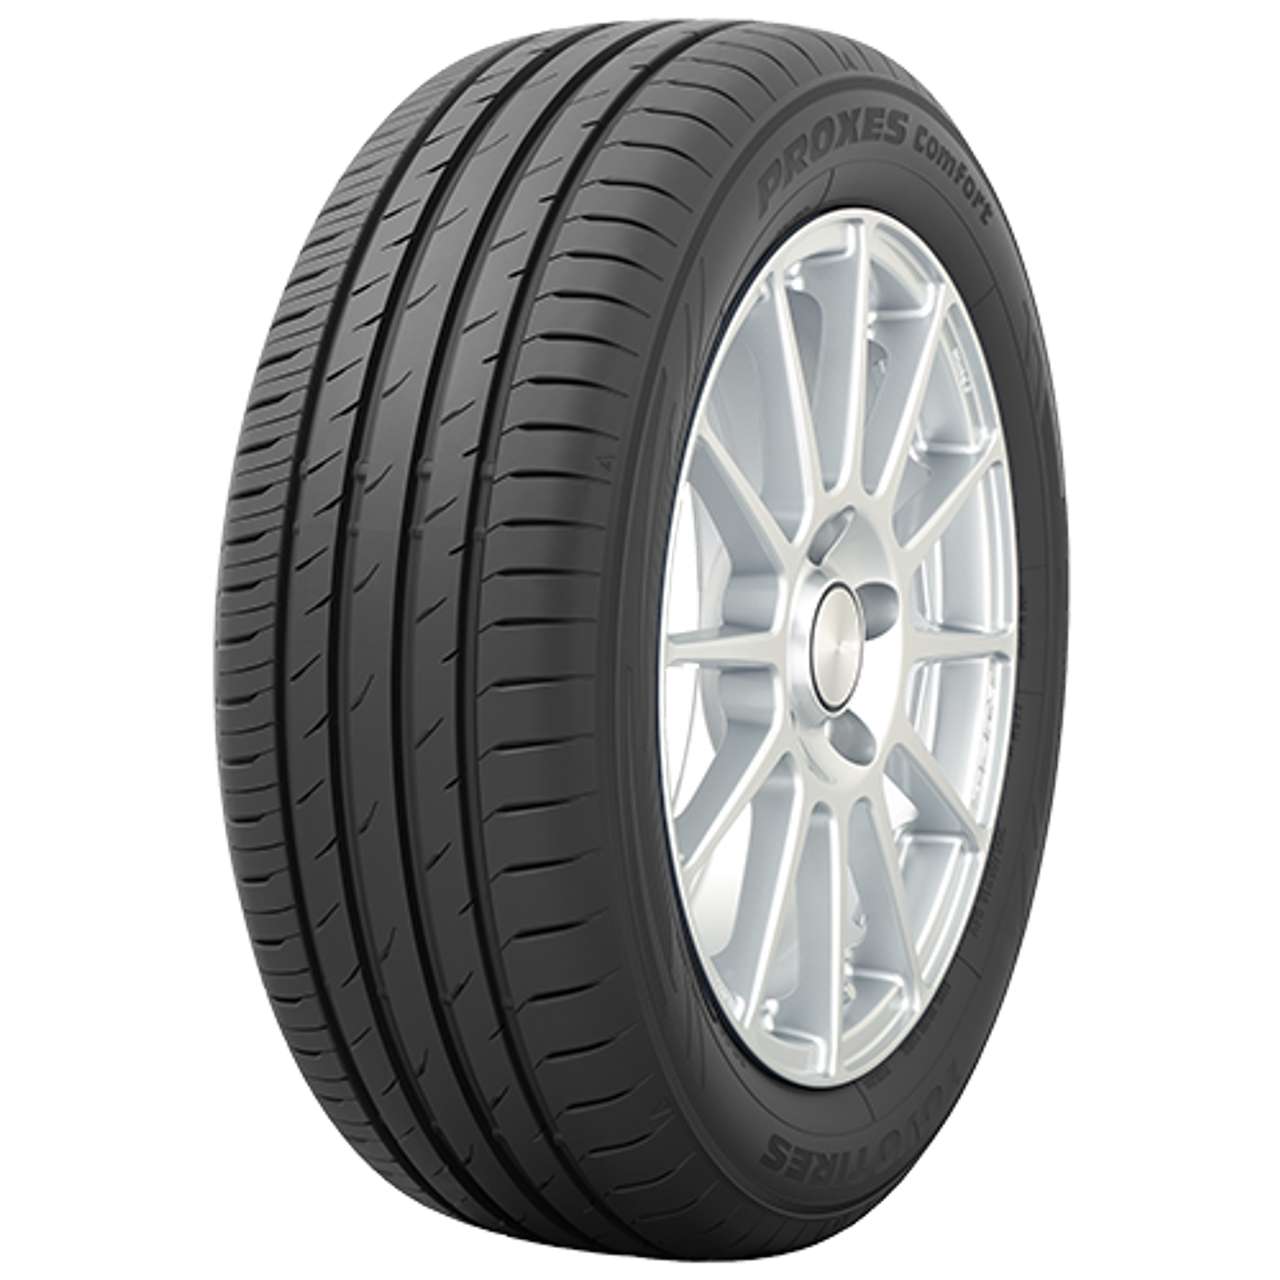 TOYO PROXES COMFORT 175/65R15 88H BSW XL